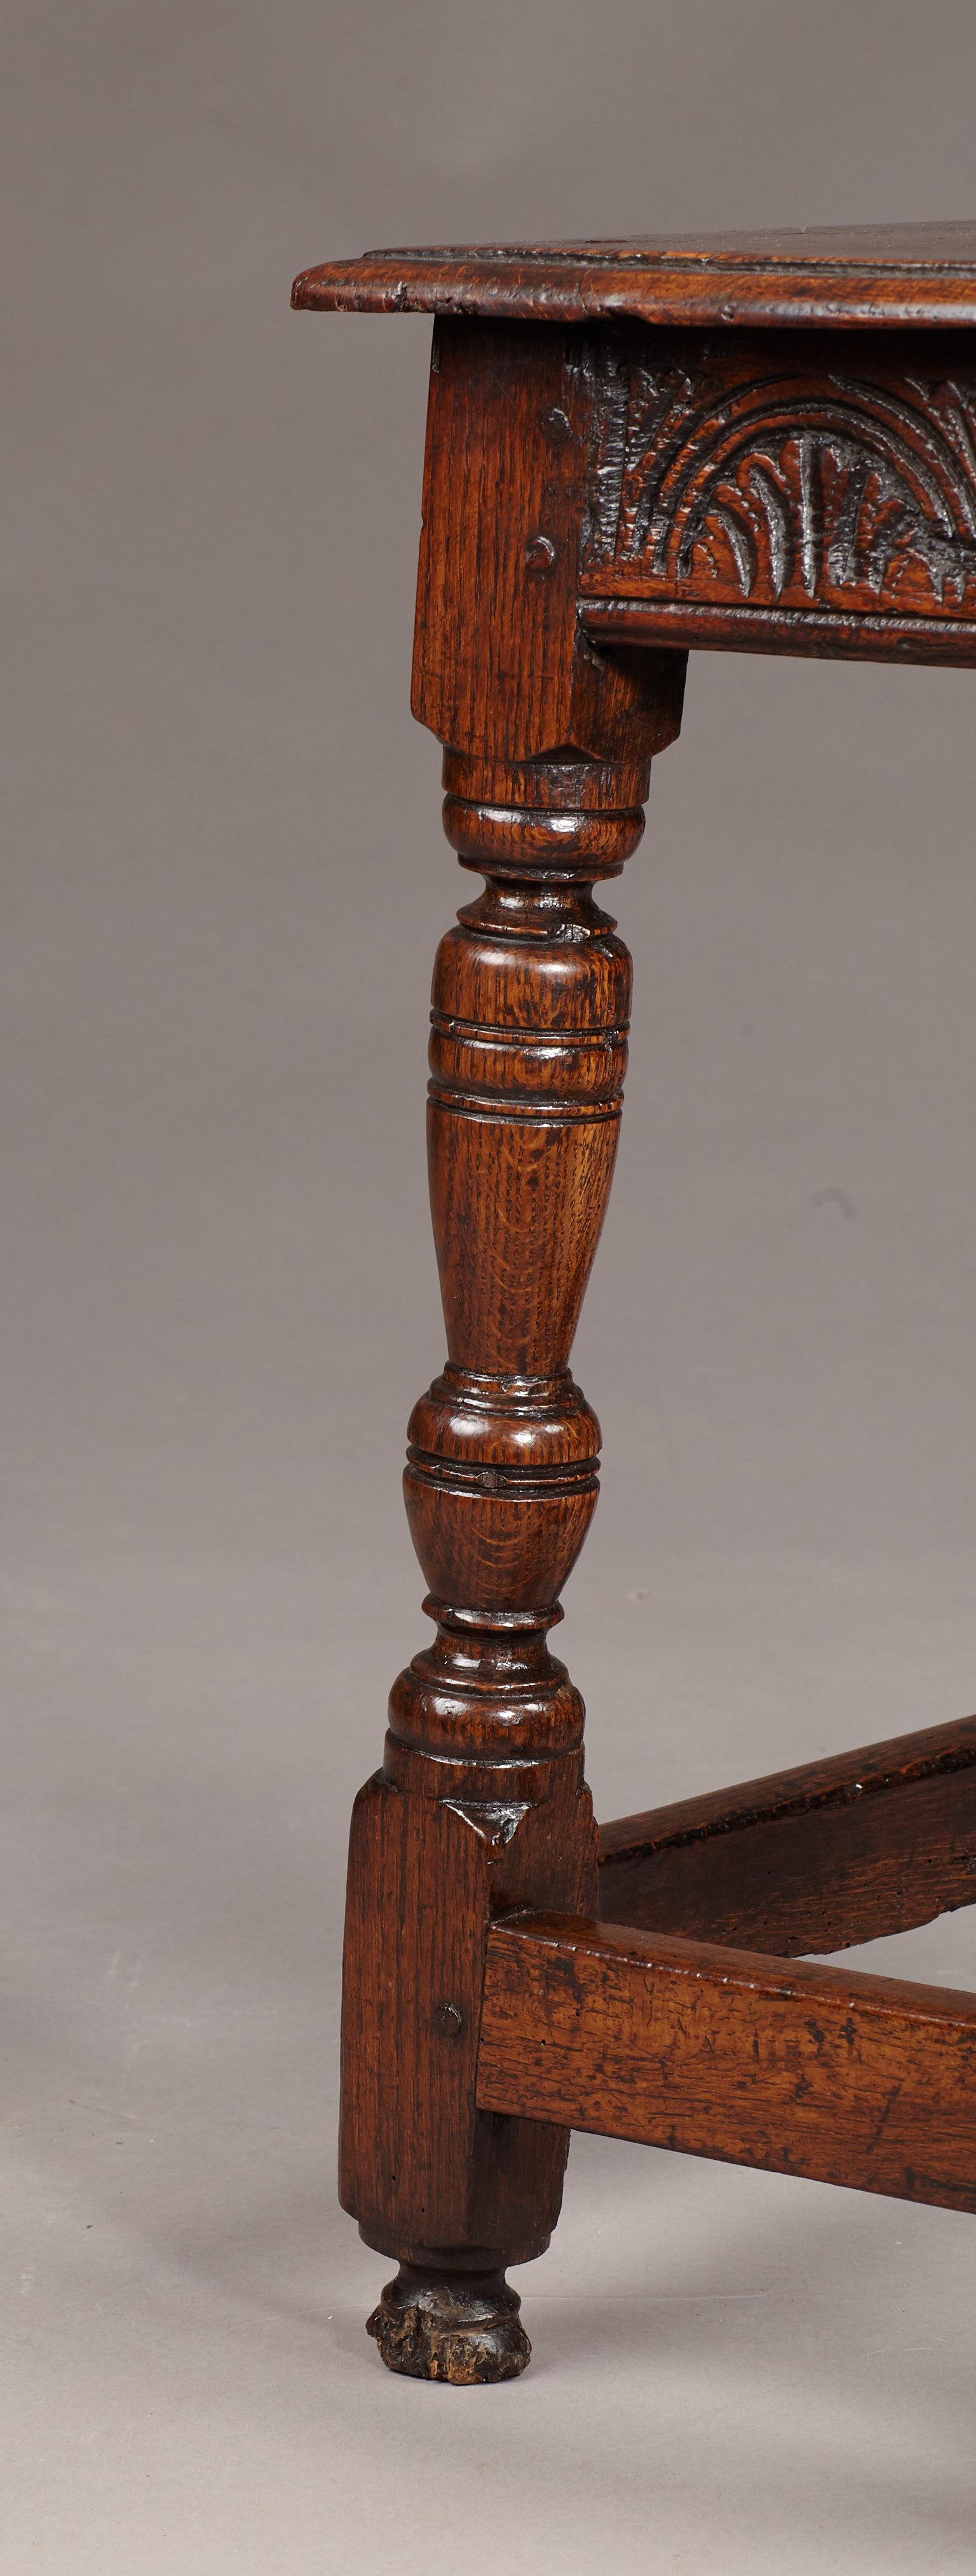 18th Century and Earlier Oak Joined Stool, Charles I period, English, circa 1630-1640